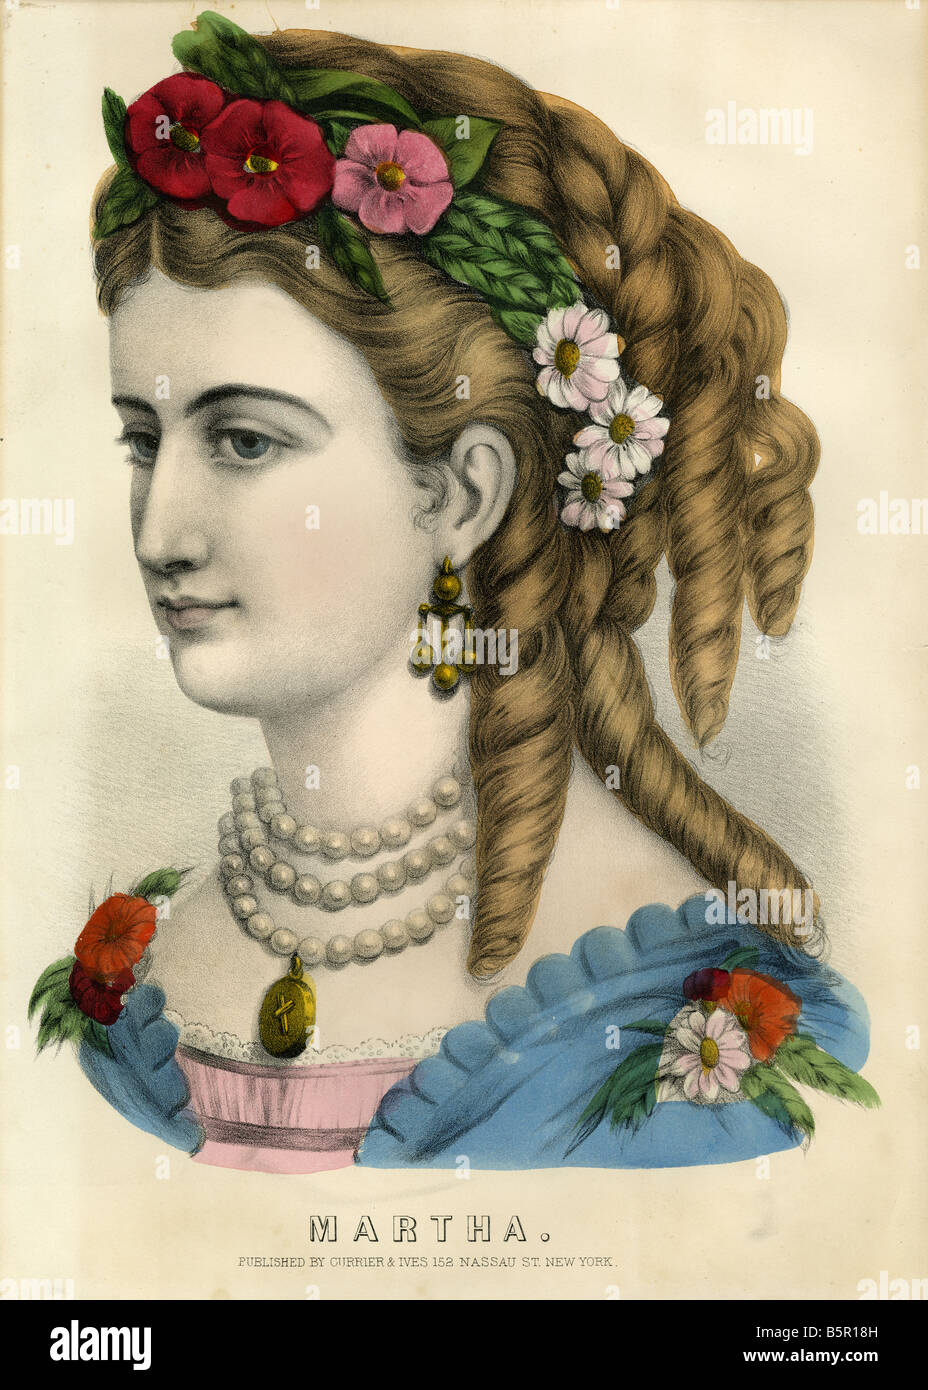 Circa 1840s to 1860s Currier & Ives hand colored lithograph of a woman named 'Martha.' Stock Photo